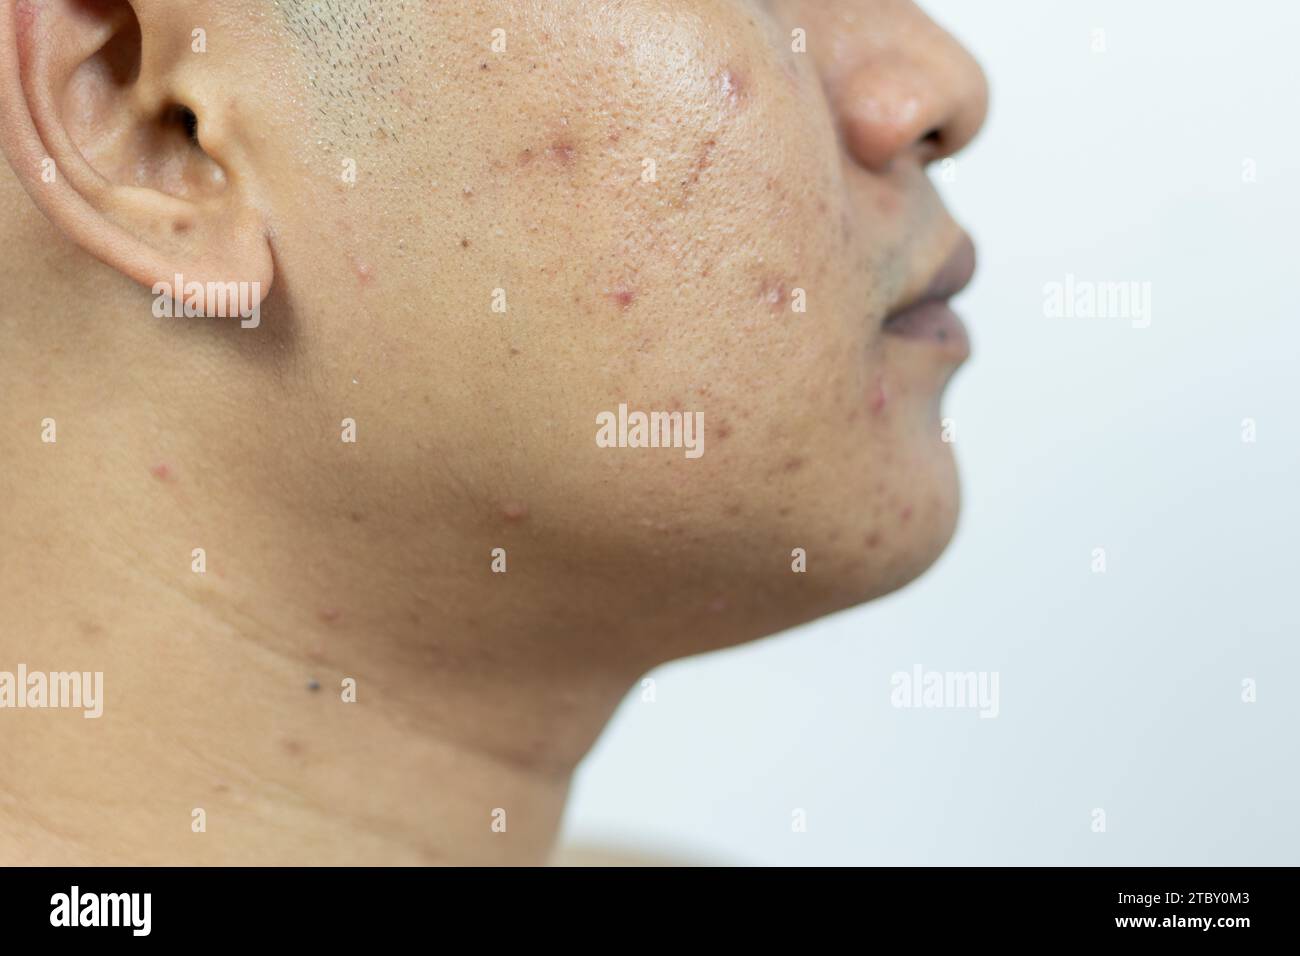 skin problems. problem of inflamed acne on the face. Inflamed acne consists of swelling, redness, and pores that are severely clogged with bacteria, o Stock Photo